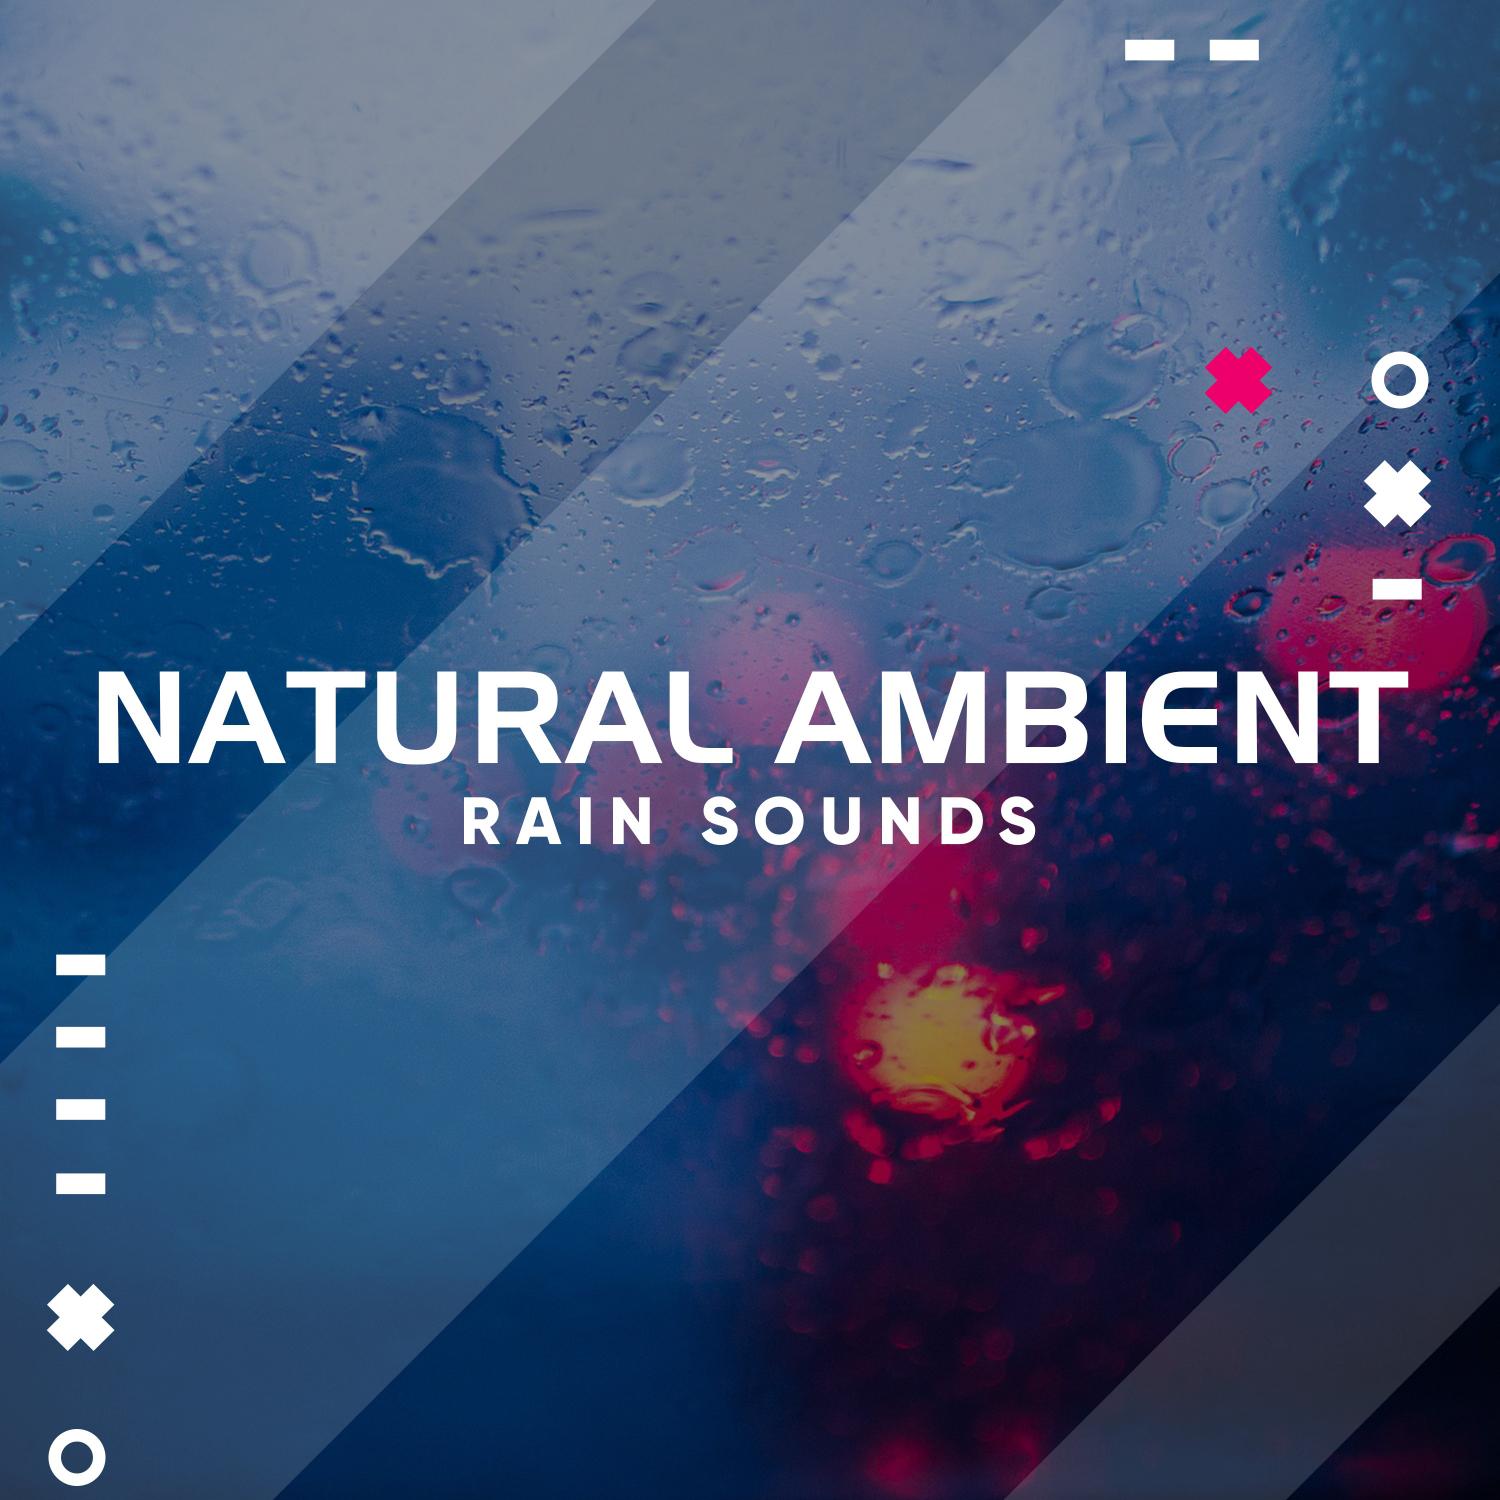 12 Natural Ambient Rain Tracks - Great White Noise for Sleep